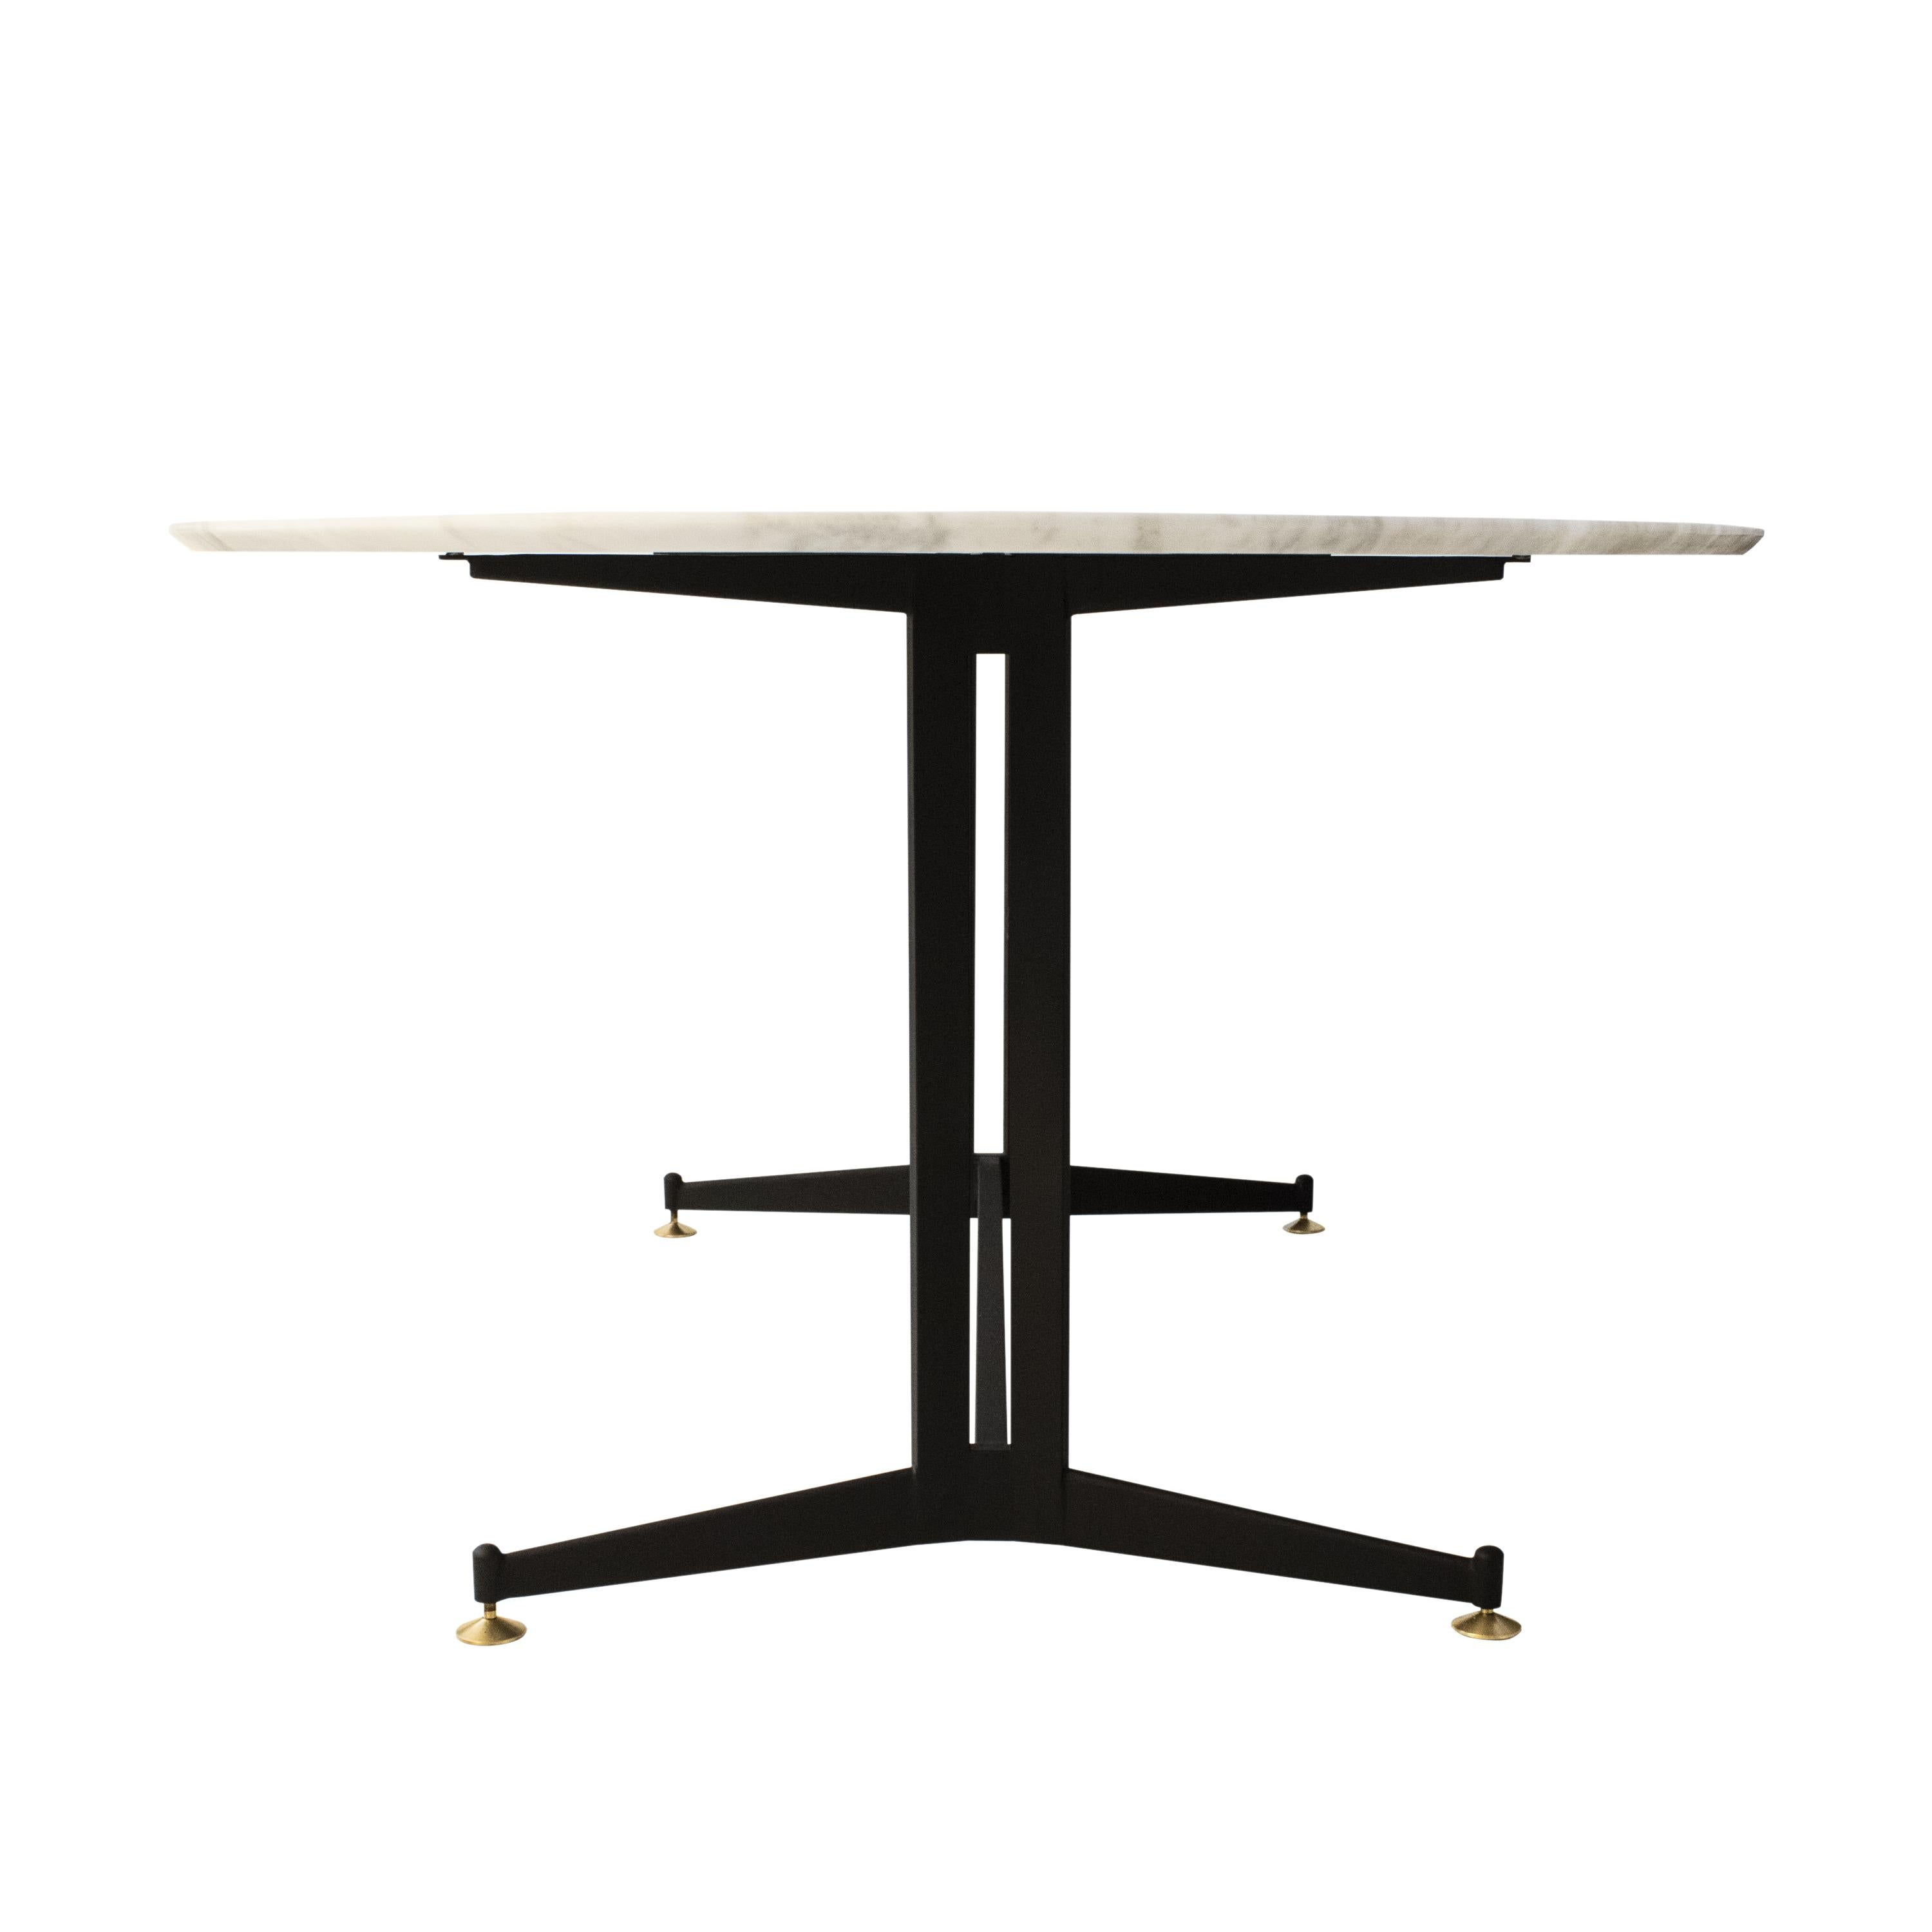 Mid-Century Modern Carrara Marble Dining Table with Metallic Foot, Italy, 1950 In Good Condition For Sale In Madrid, ES